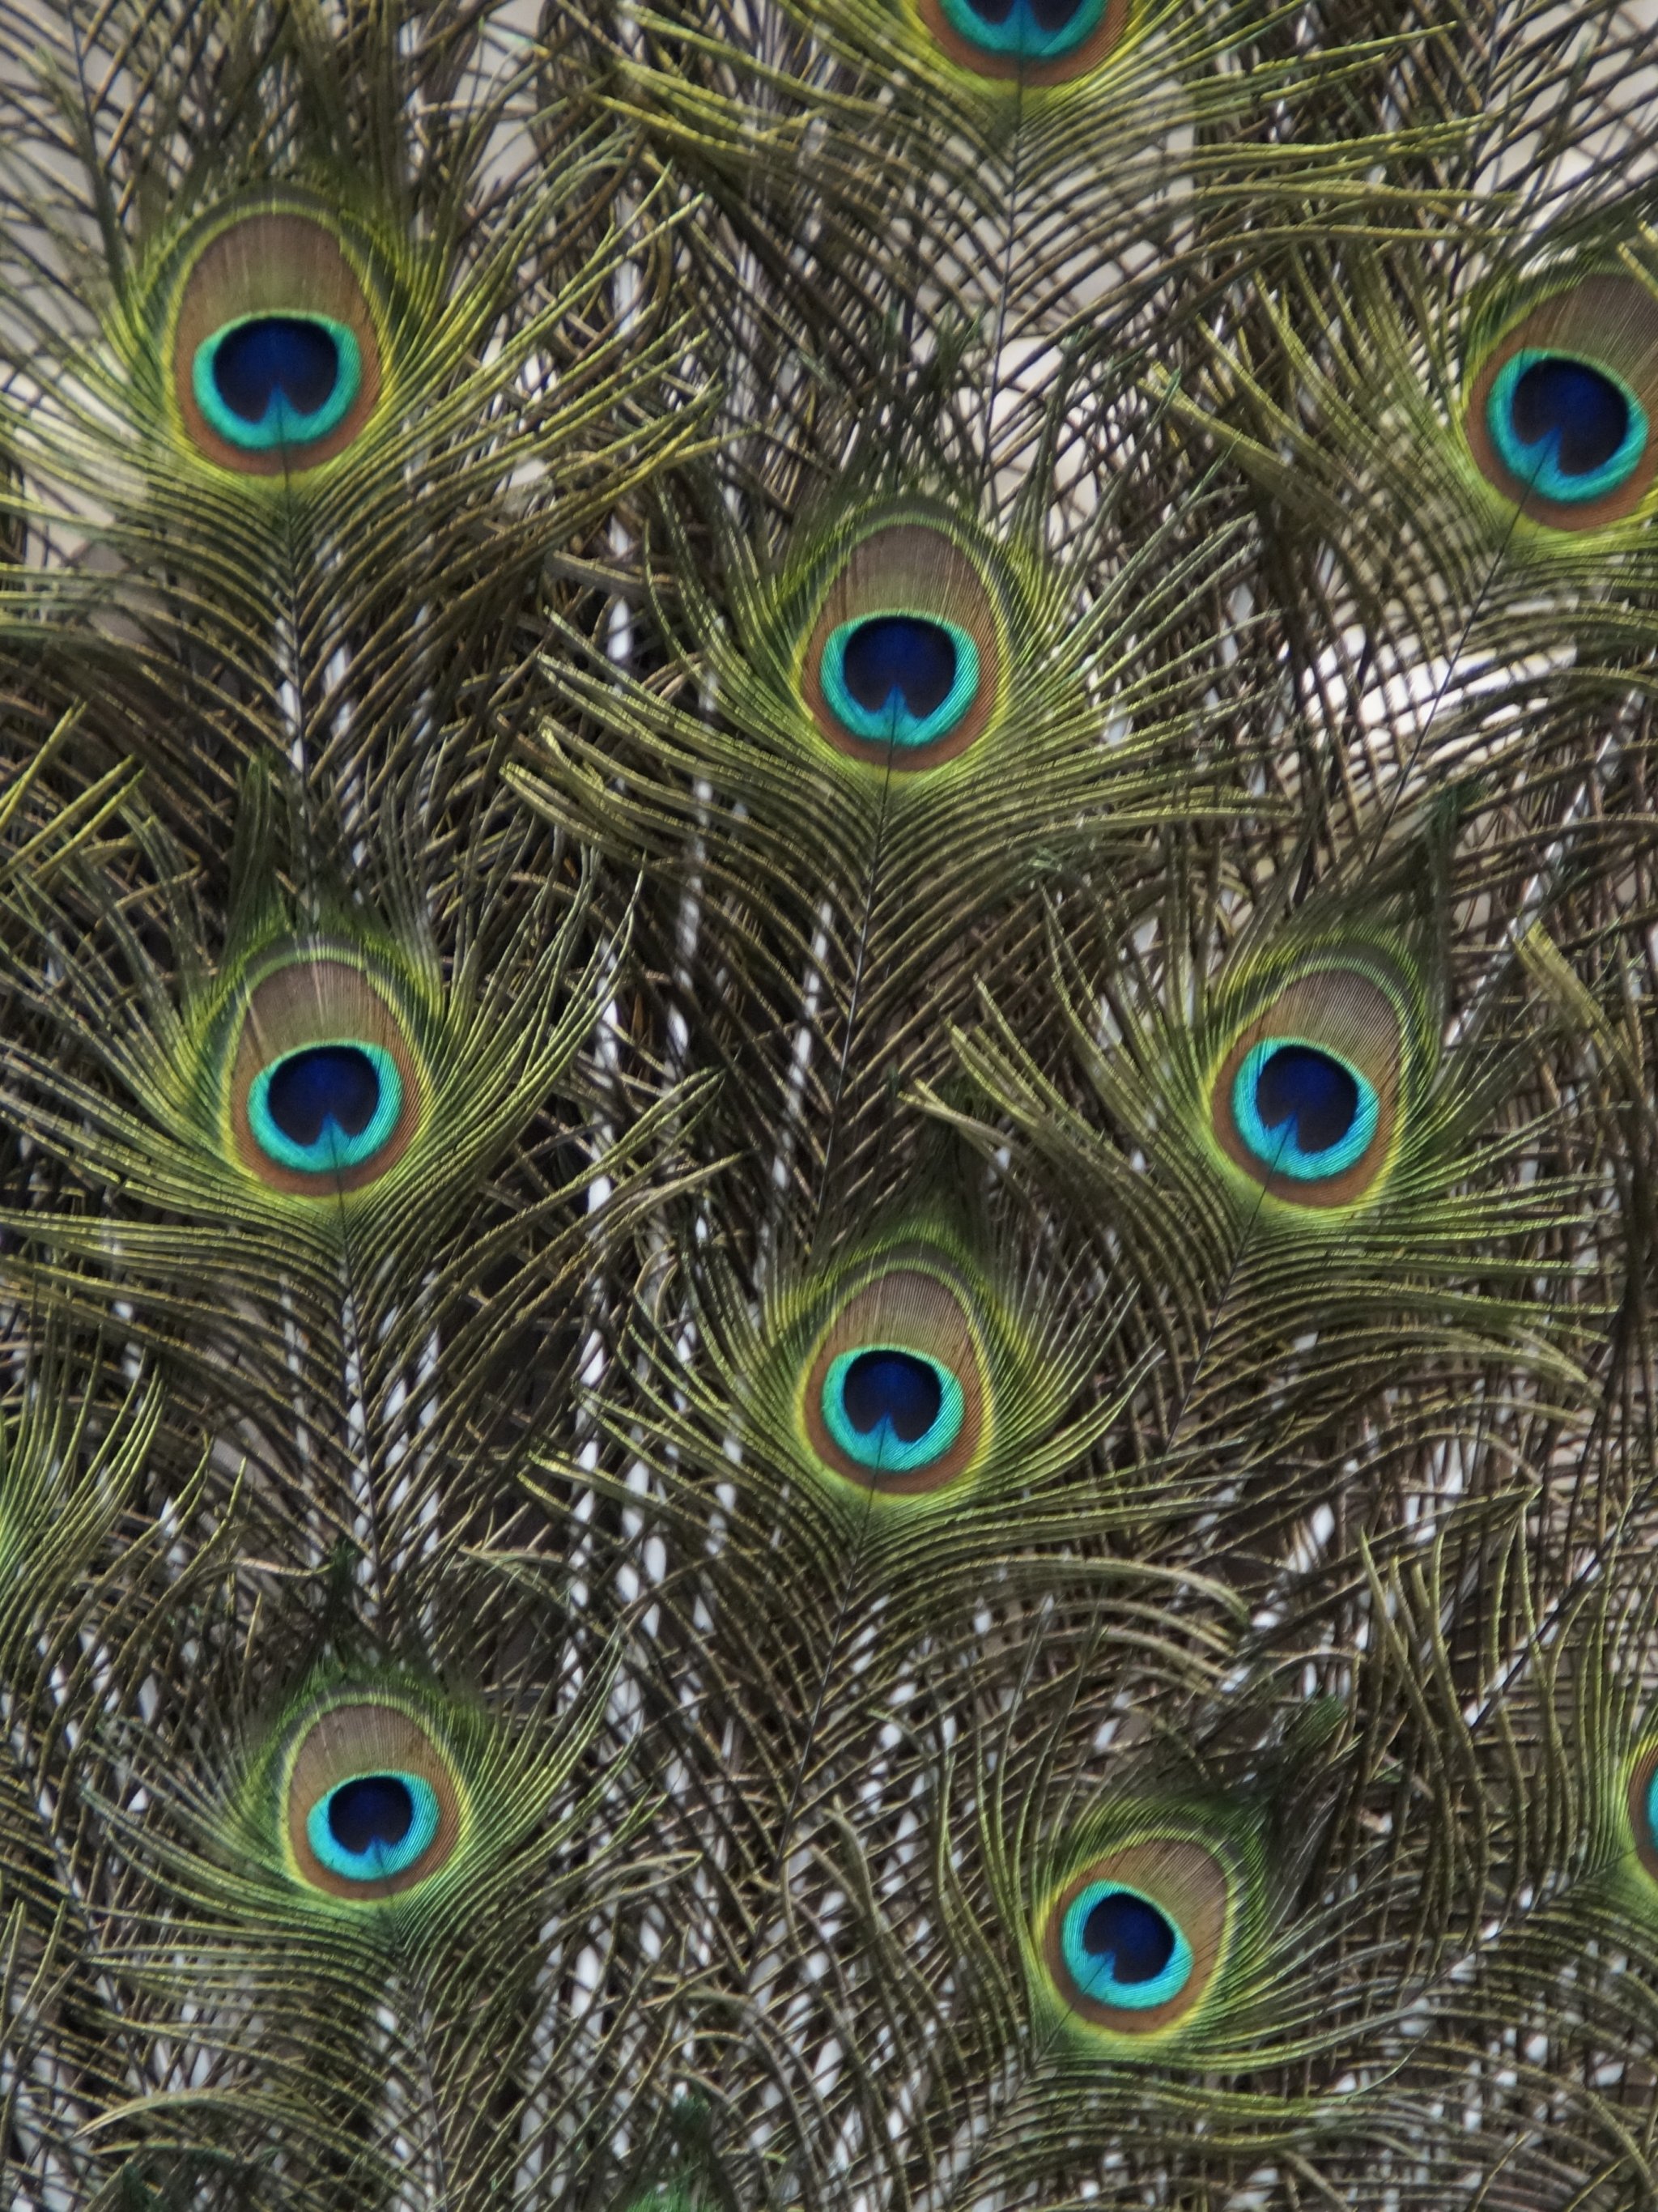 1000 Peacock Feather Images  Pictures in HD  Pixabay